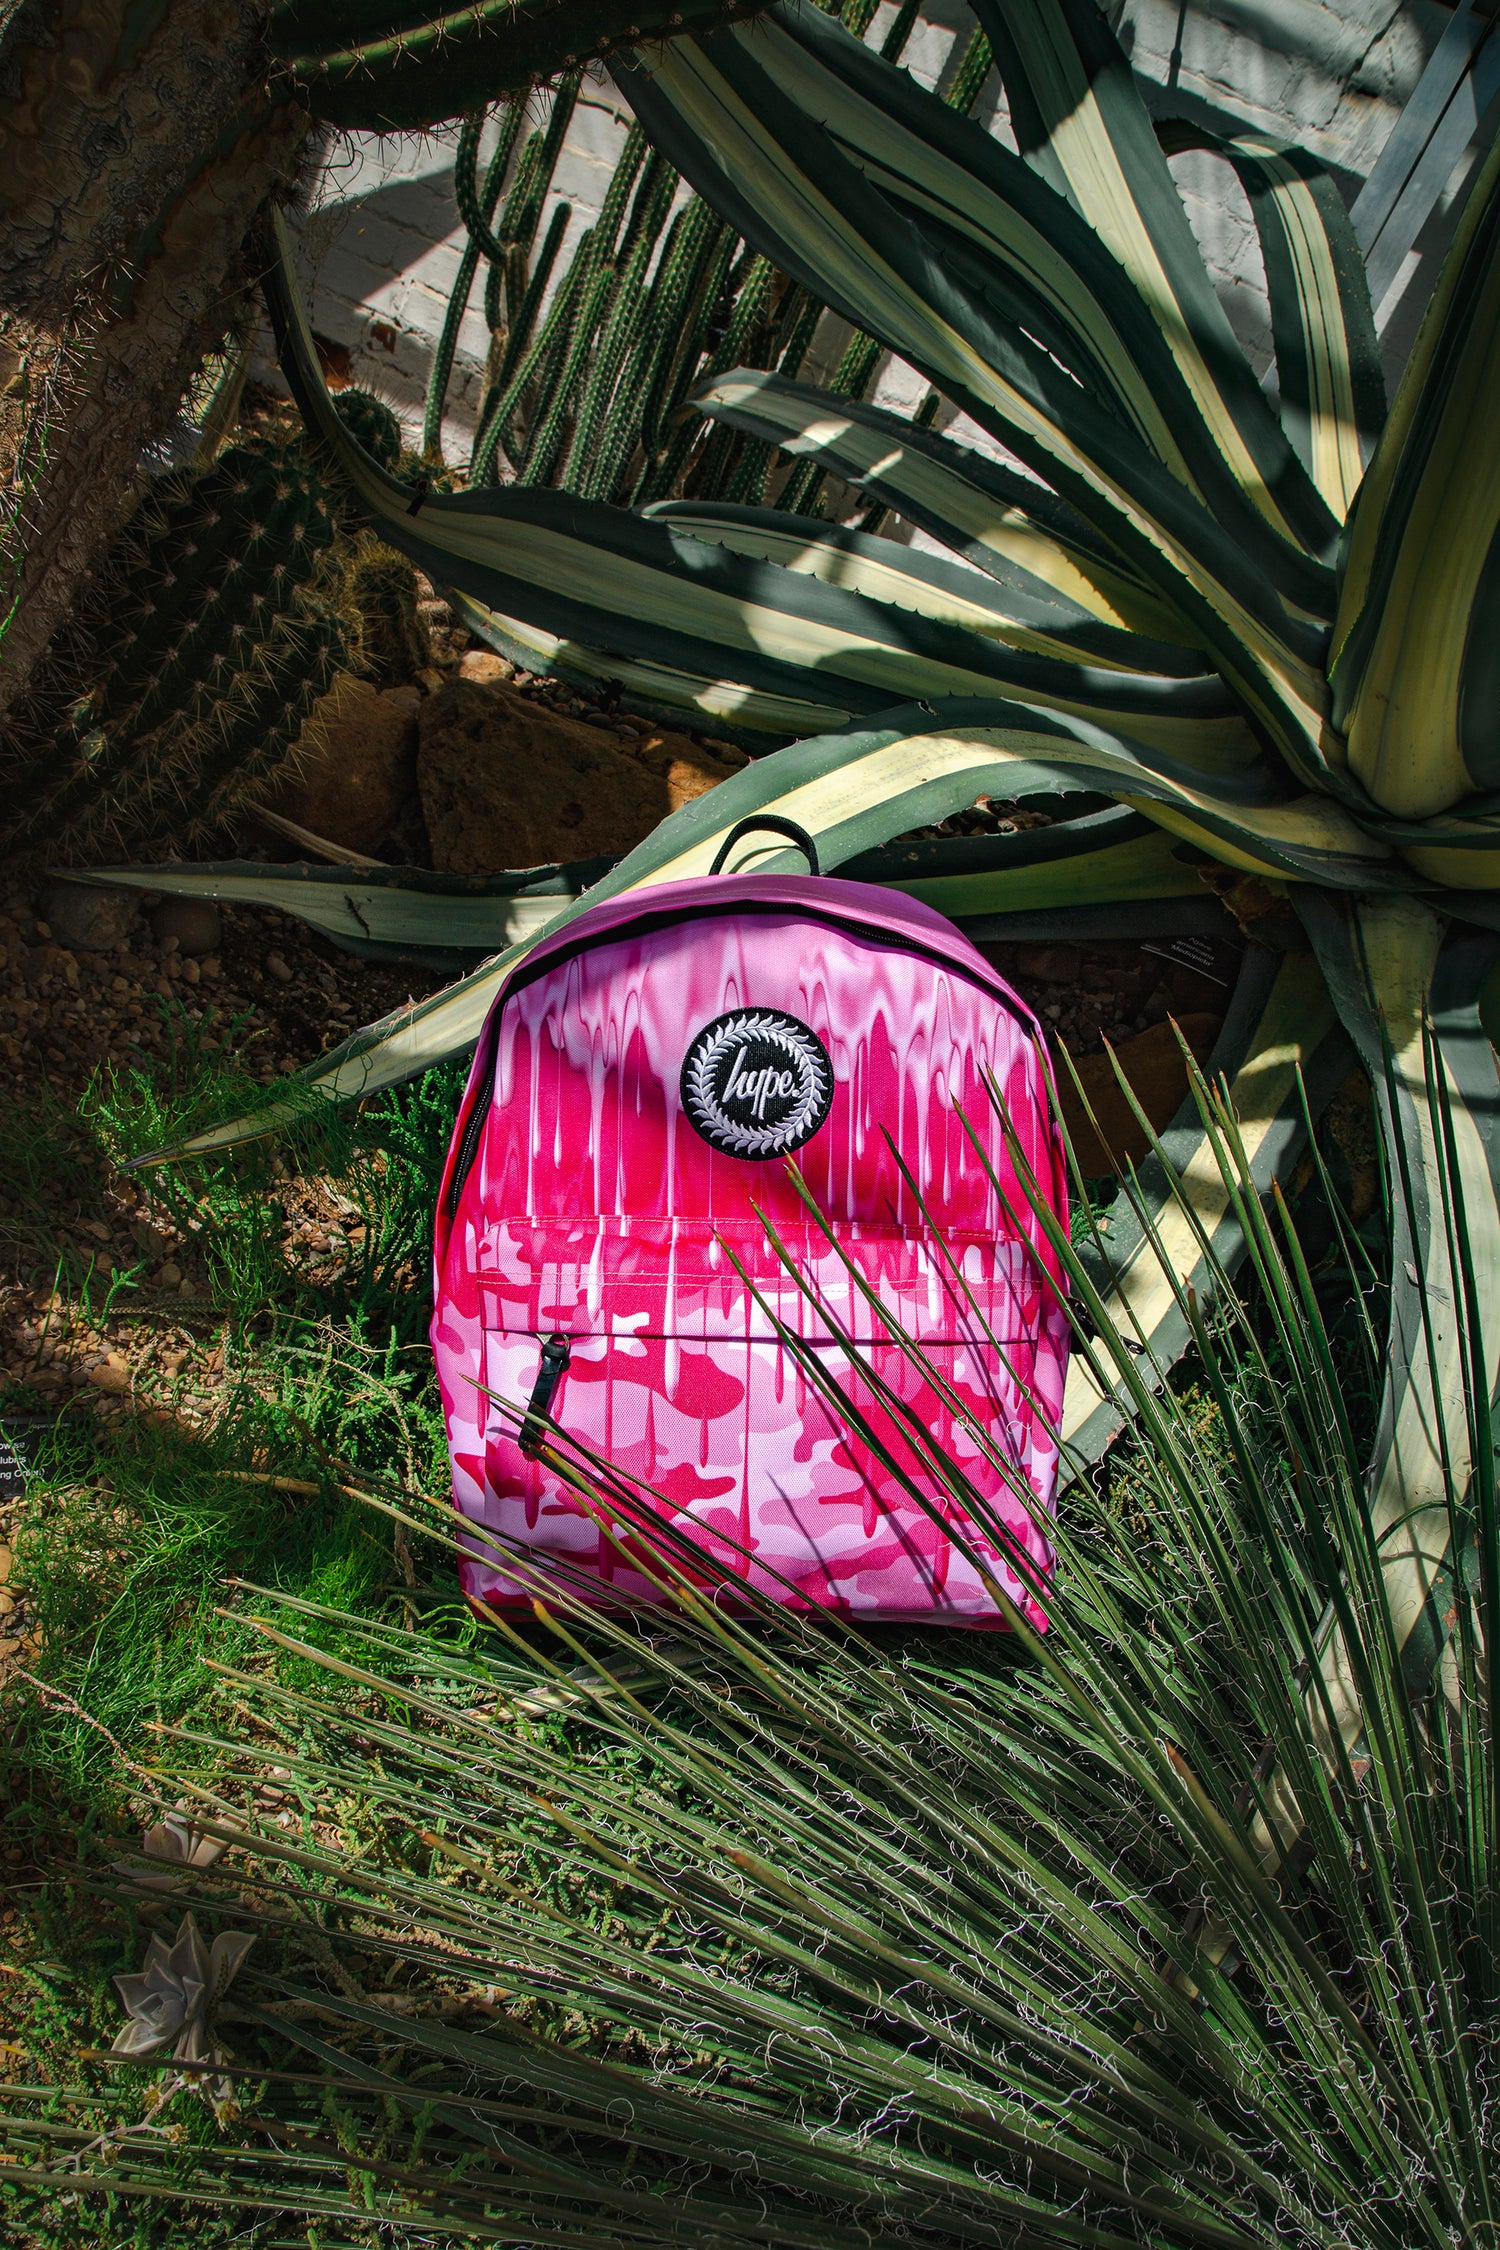 HYPE PINK CAMO SLIME DRIPS BACKPACK